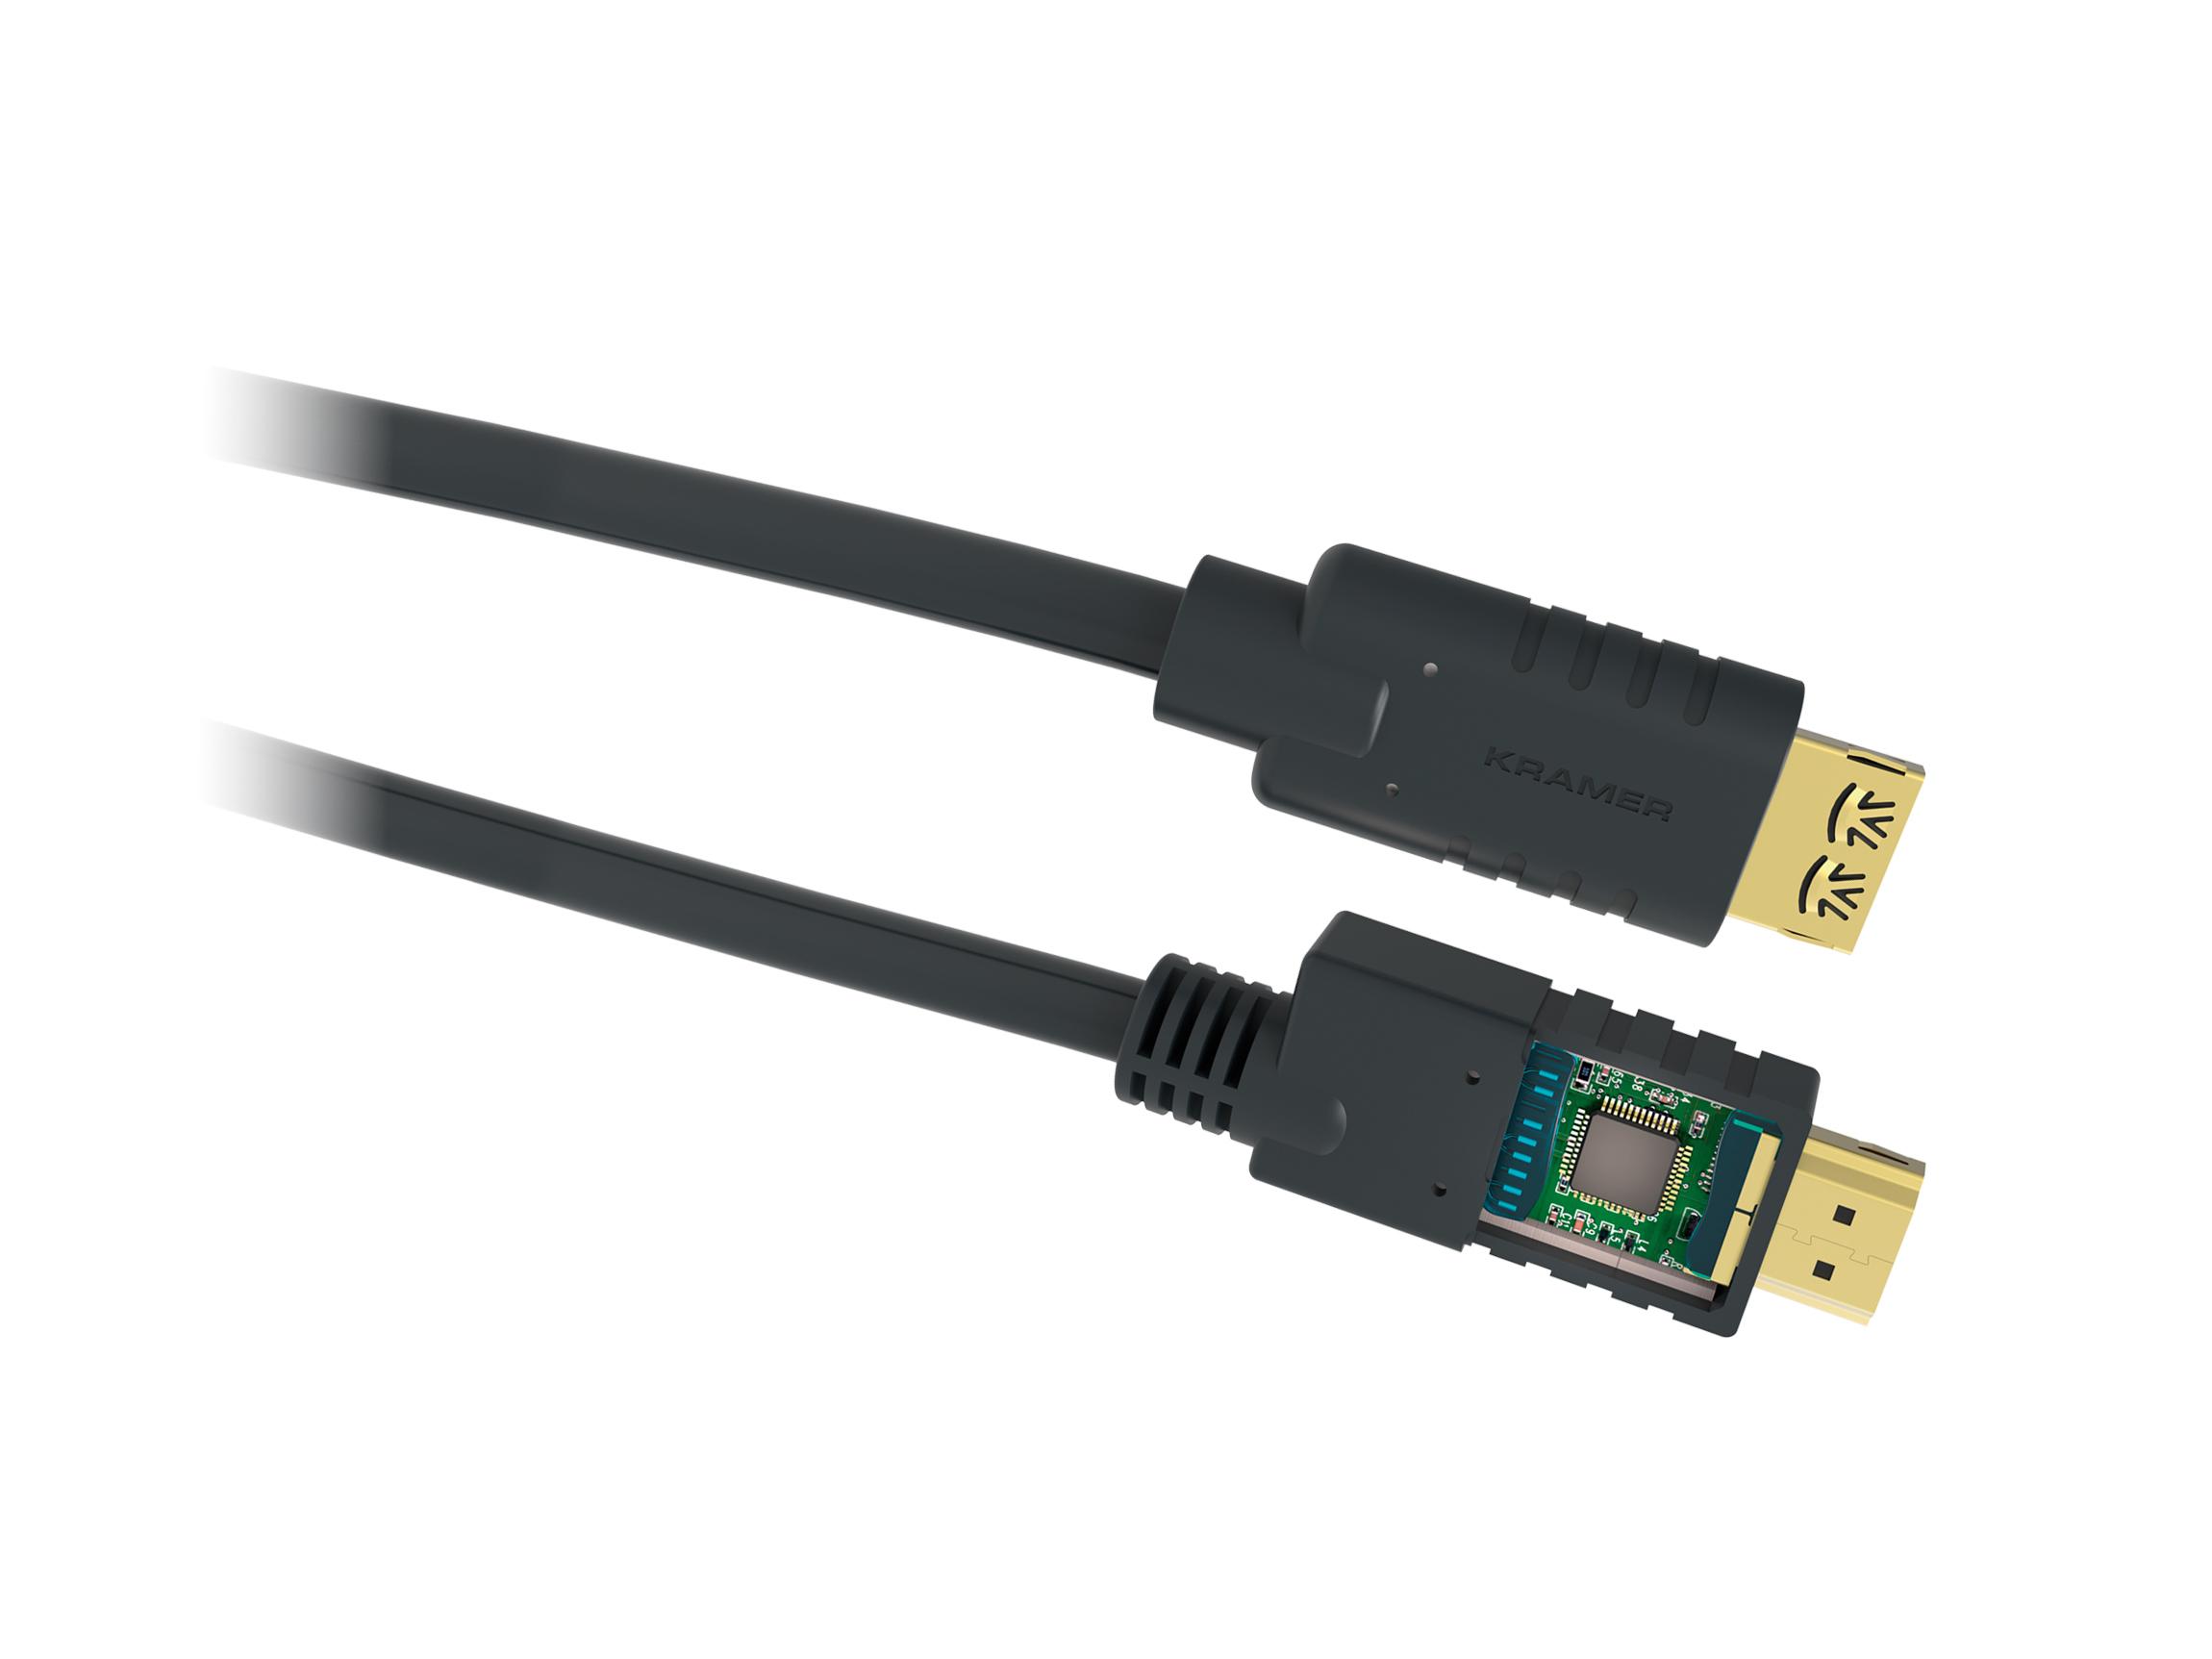 CA-HM-50 Active High Speed HDMI Cable with Ethernet - 50ft by Kramer